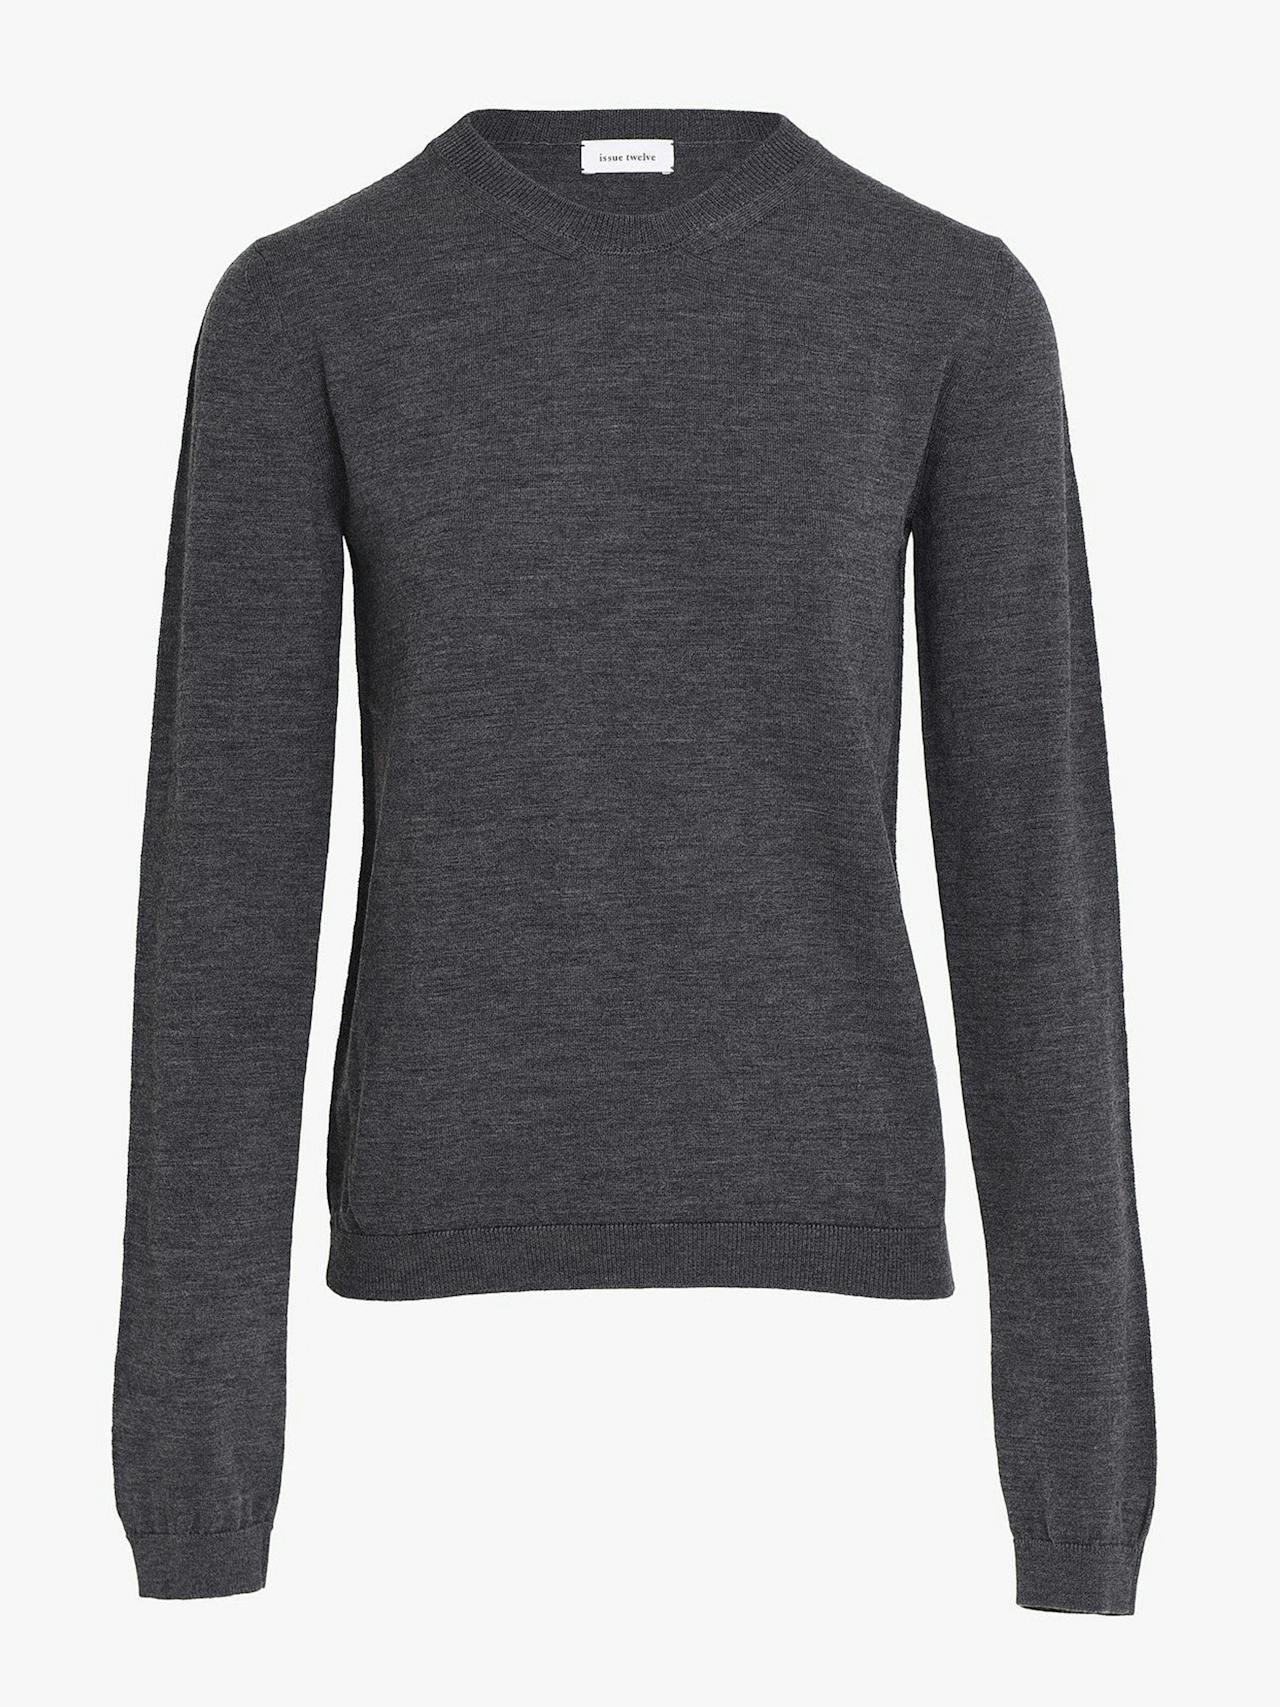 The Mia grey knit by Issue Twelve has a round neck and long sleeve. The virgin wool feels soft and light on the skin. Perfect for Autumn Winter. Collagerie.com